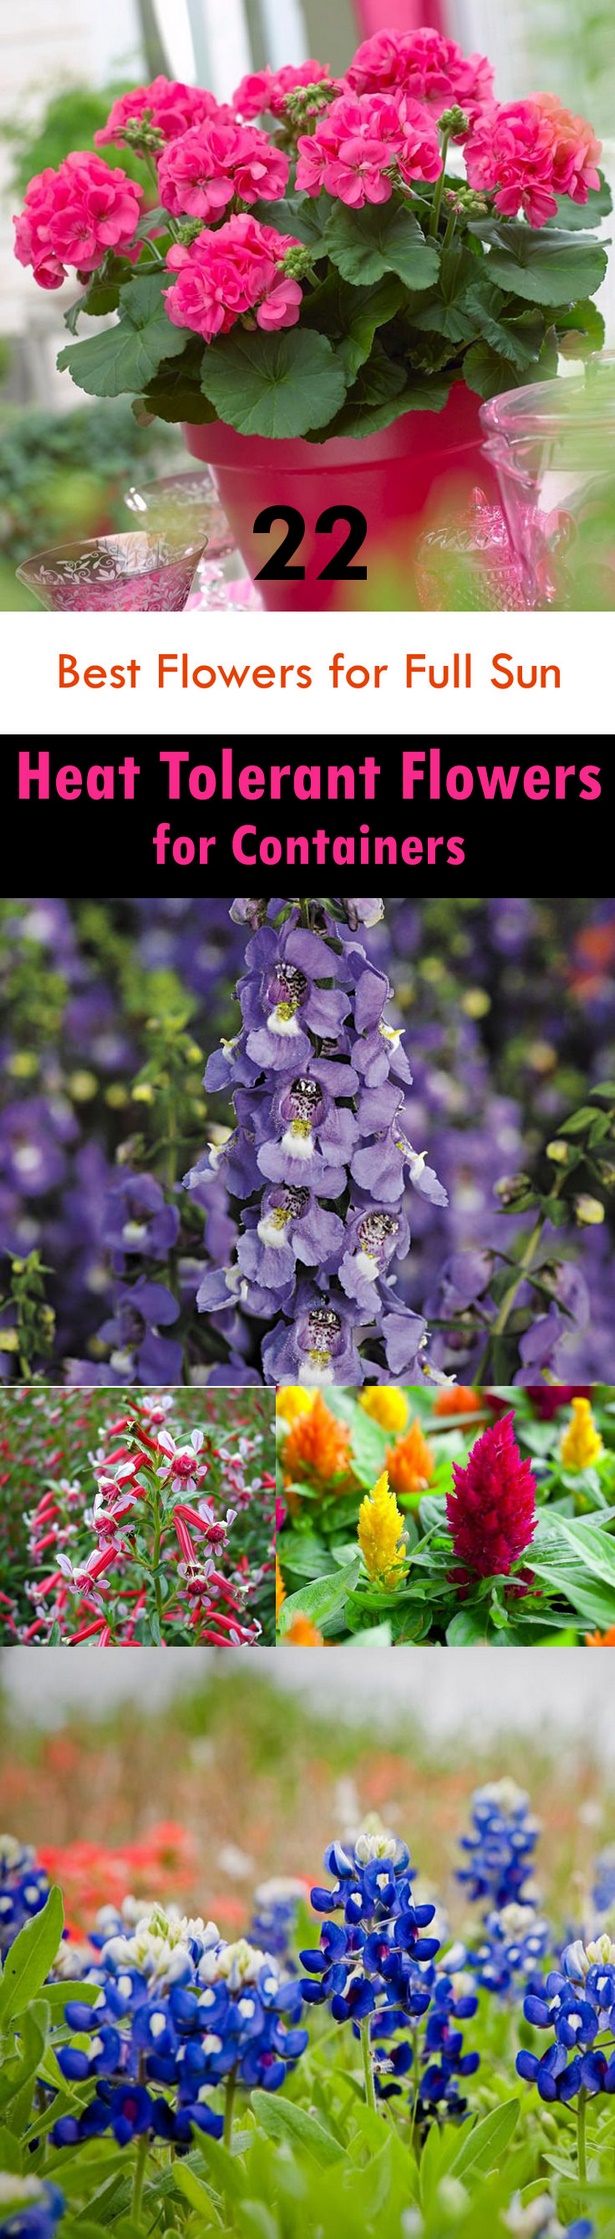 flowers-for-containers-in-full-sun-45_9 Цветя за контейнери на слънце